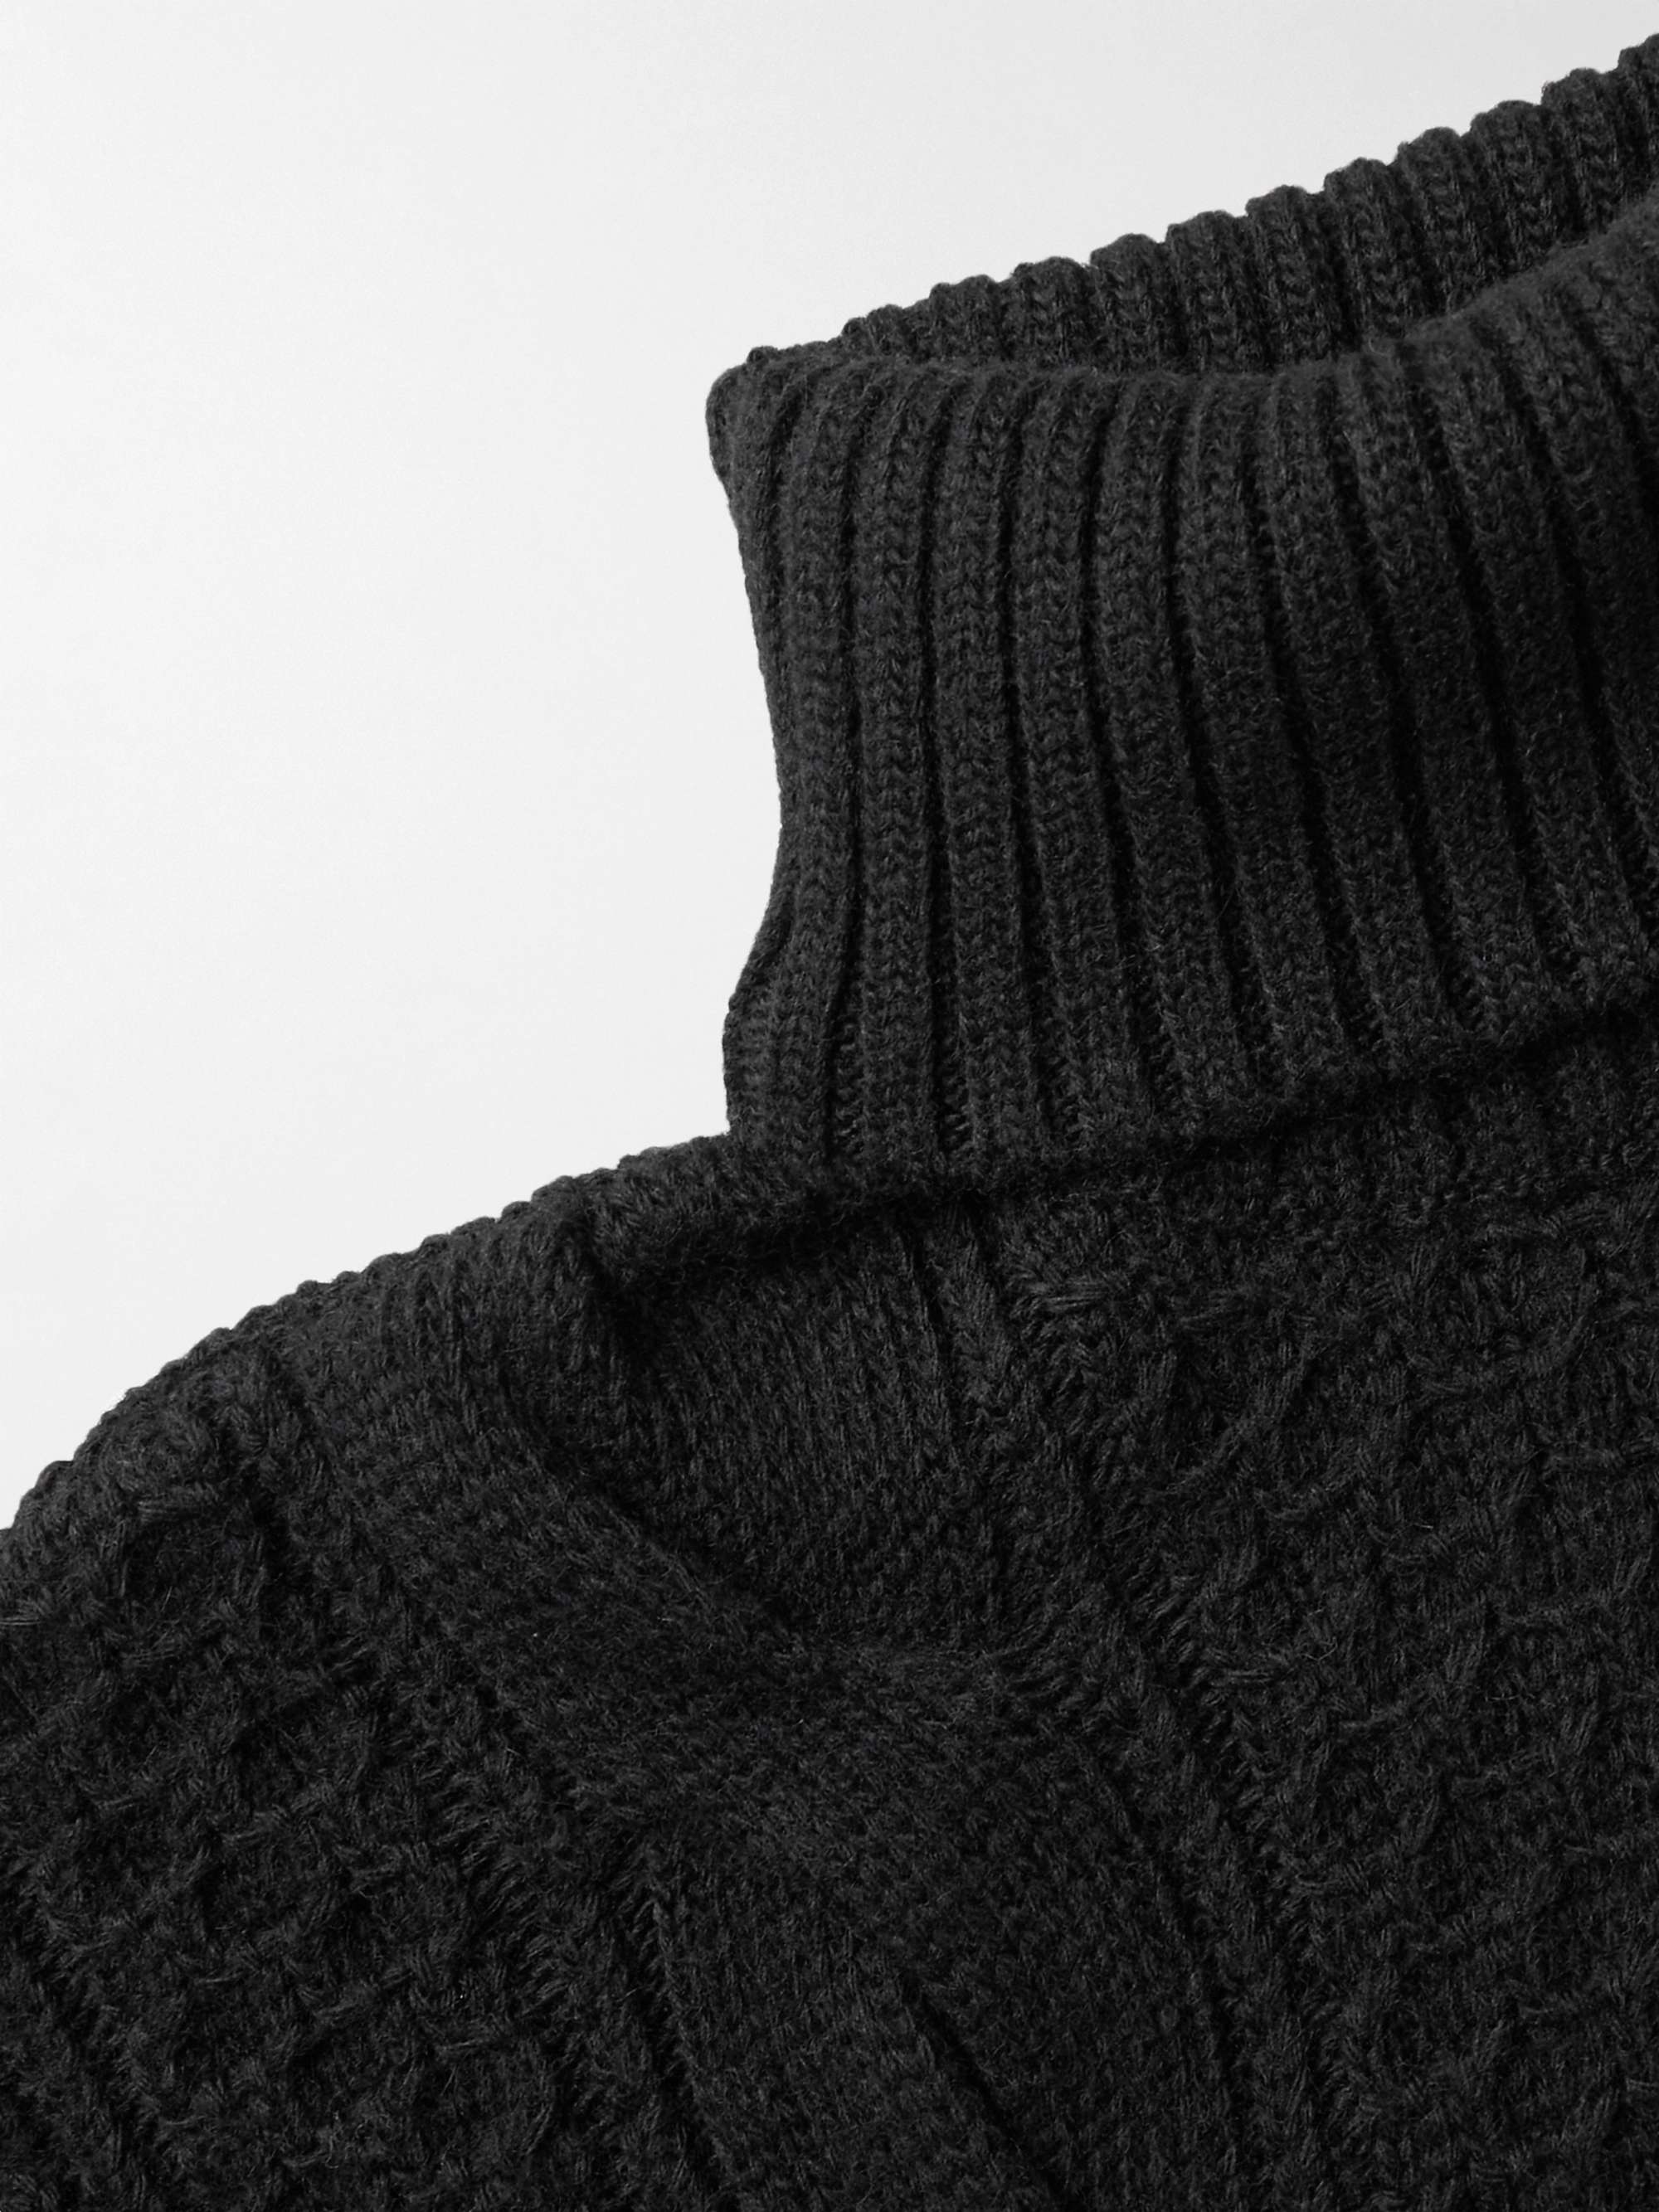 GUCCI Convertible Cable-Knit Wool Rollneck Sweater